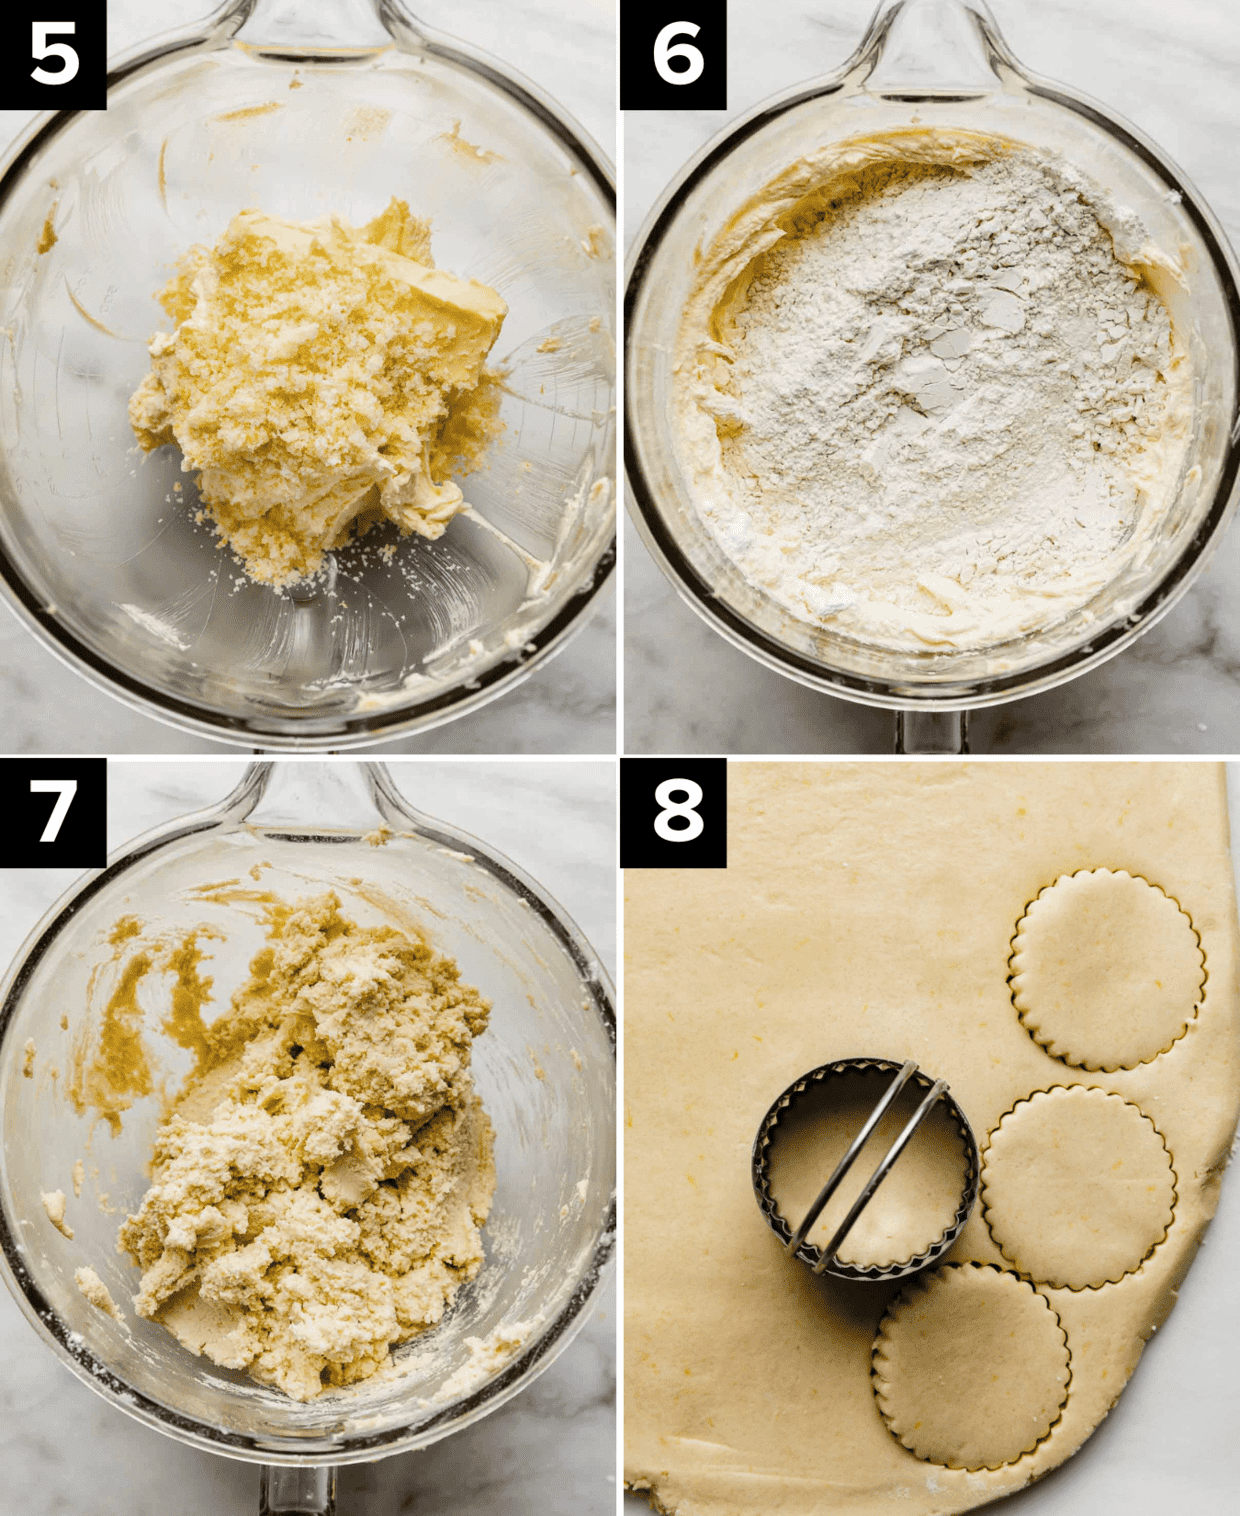 Four images, top left image is creamed butter and sugar in glass bowl, top right is a glass bowl with creamed butter and sugar and flour overtop, bottom left is Lemon Shortbread Cookie dough in glass bowl, bottom right image is Lemon Shortbread Cookie dough spread into thick layer and round cookie cutter on the dough.